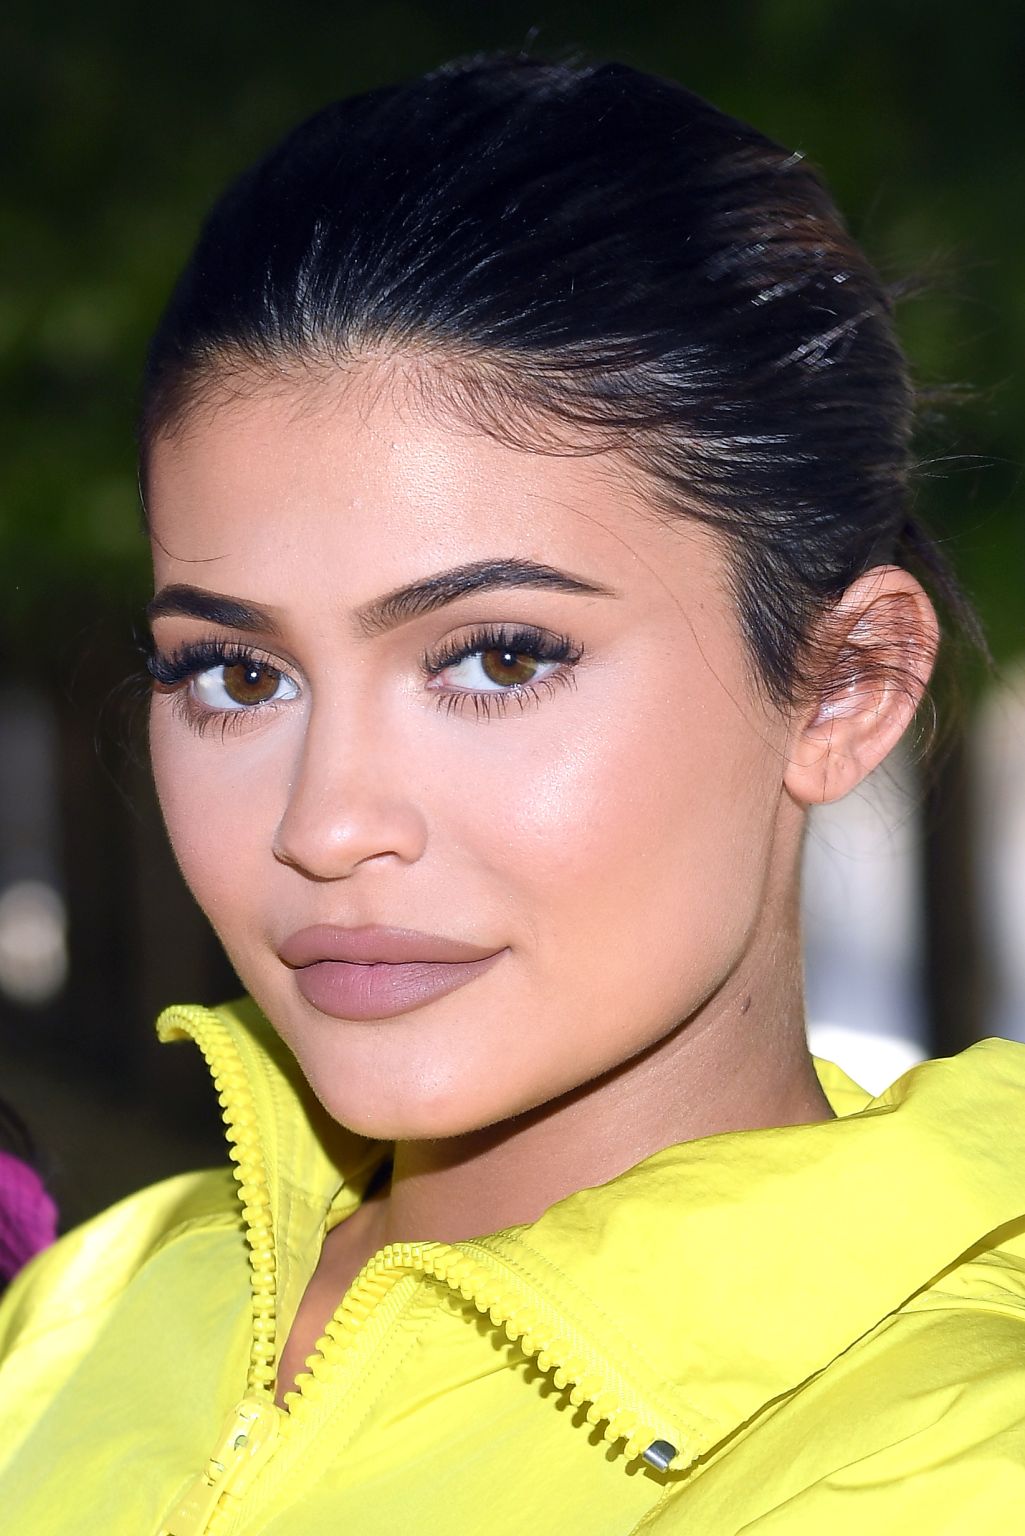 Hear Candid Kylie Jenner Fawn Over Stormi’s Black Features — “She Has ...